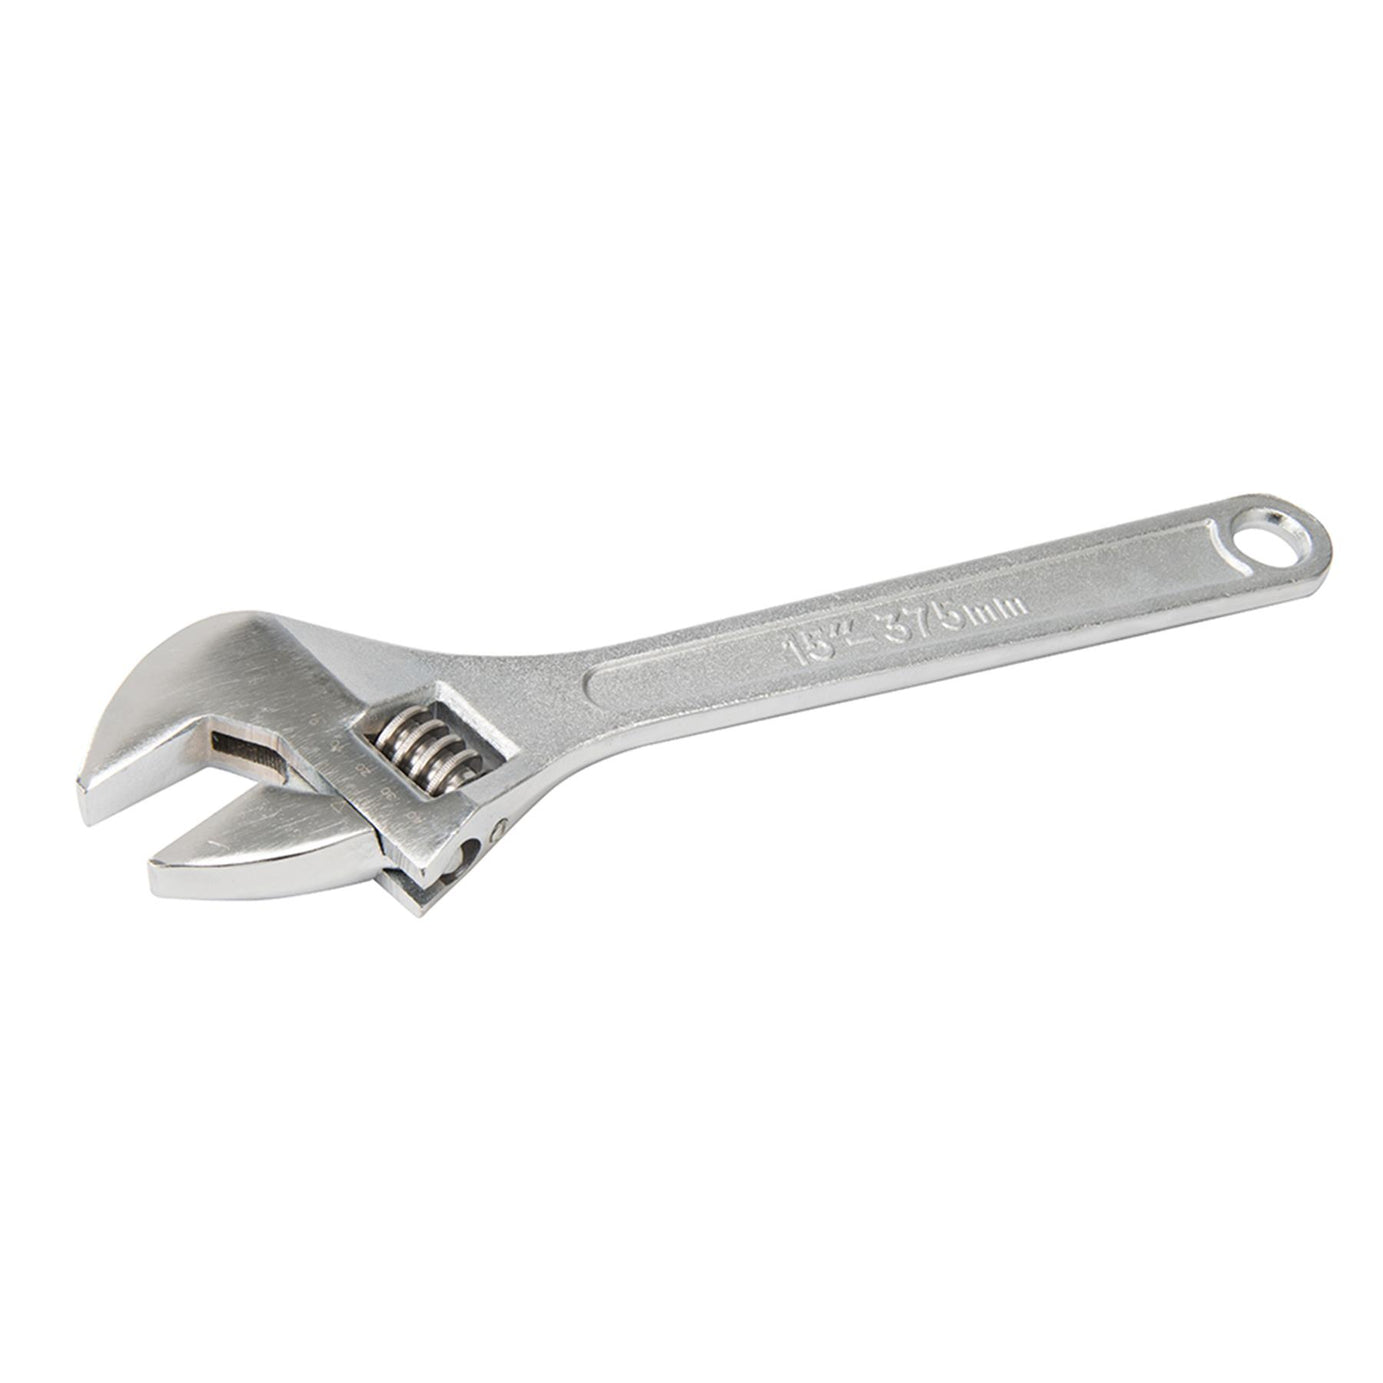 Adjustable Wrench 375mm Length - Jaw 41mm Drop-Forged Chrome Plated New